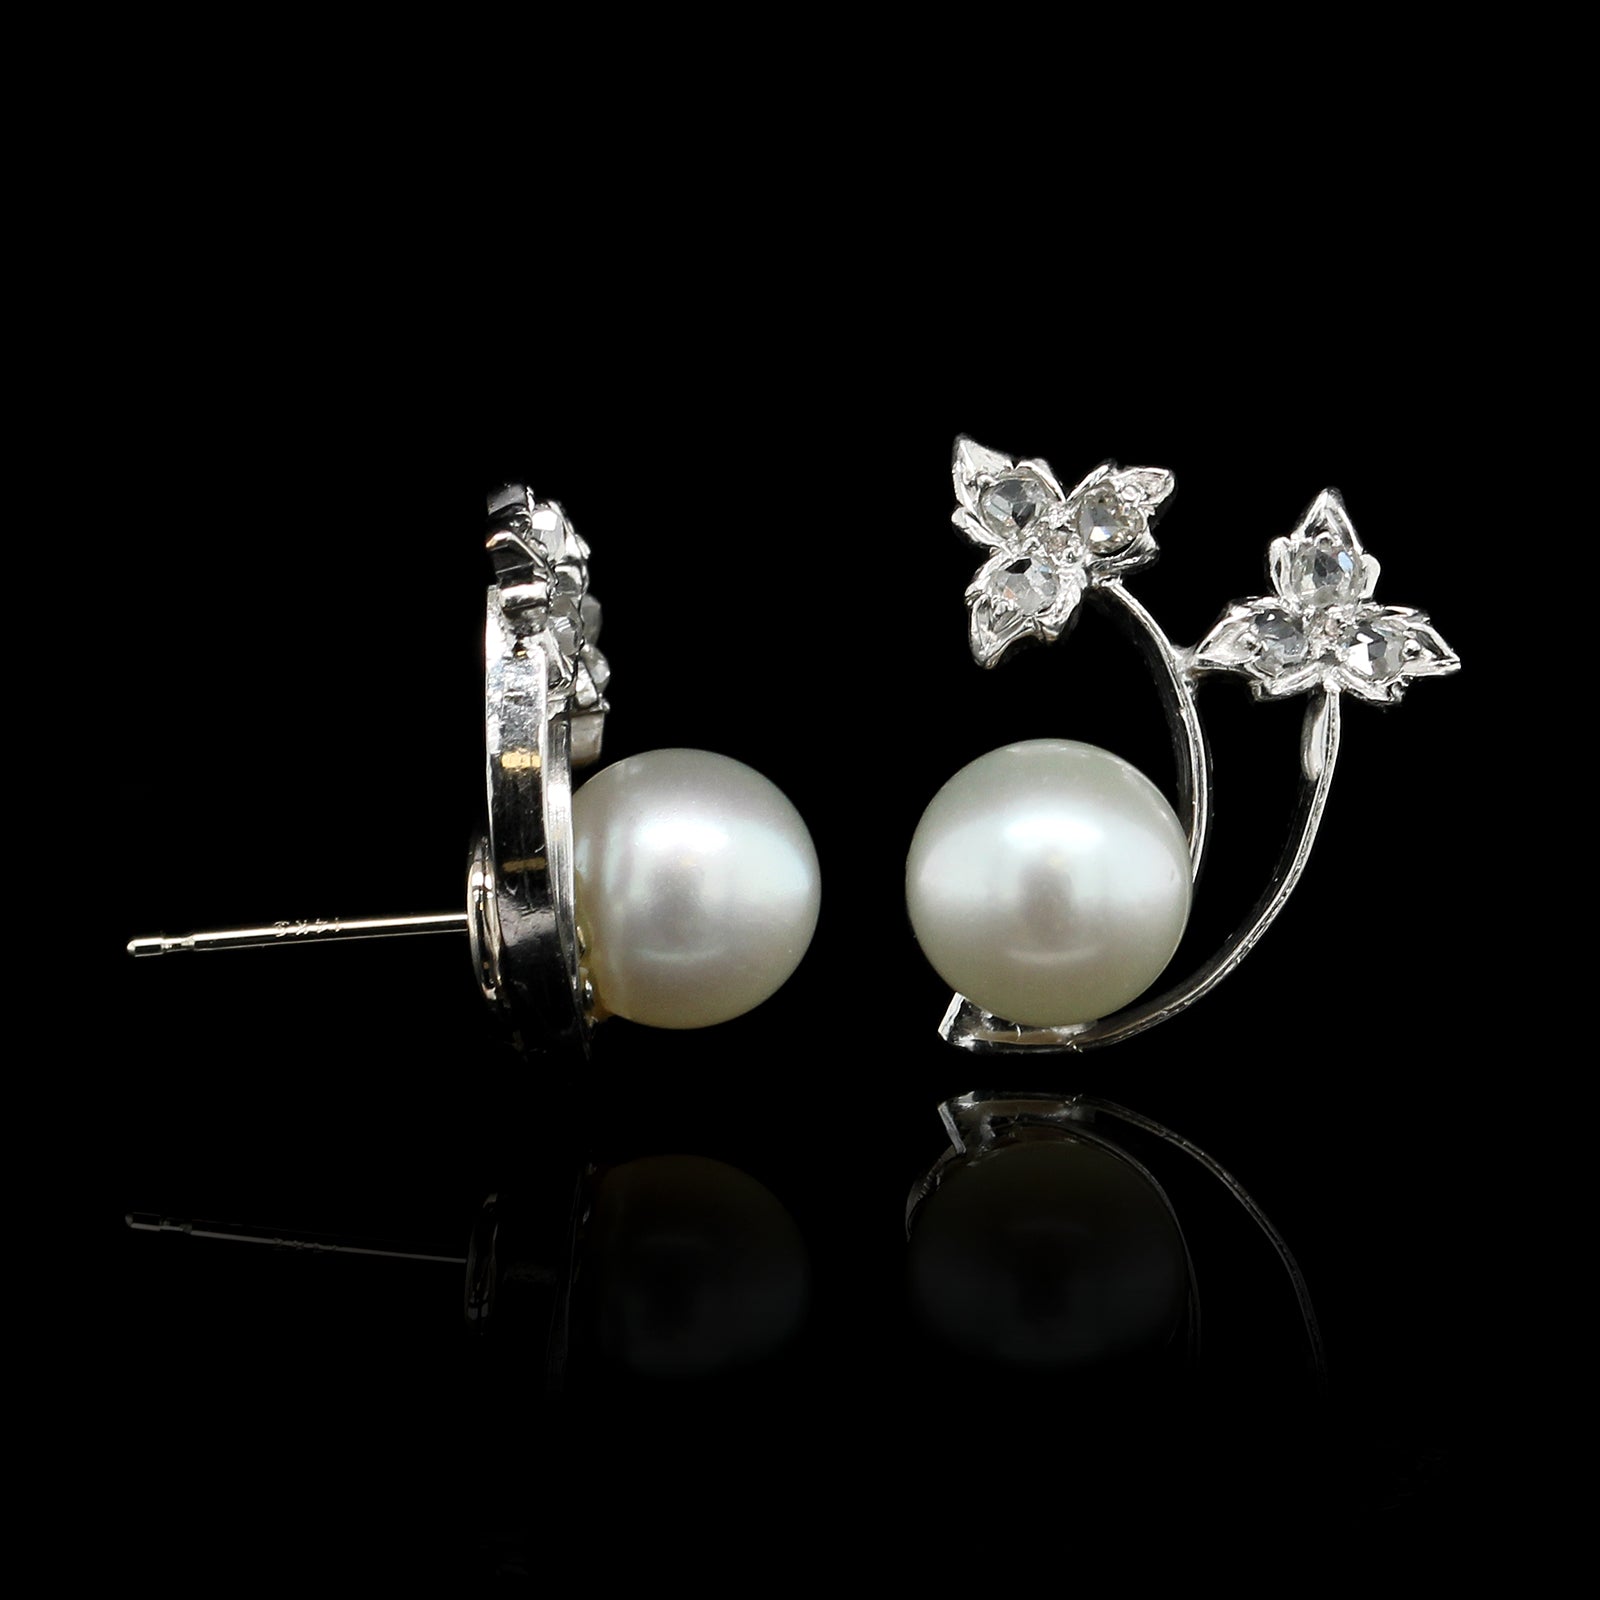 14K White Gold Estate Cultured Pearl and Diamond Earrings